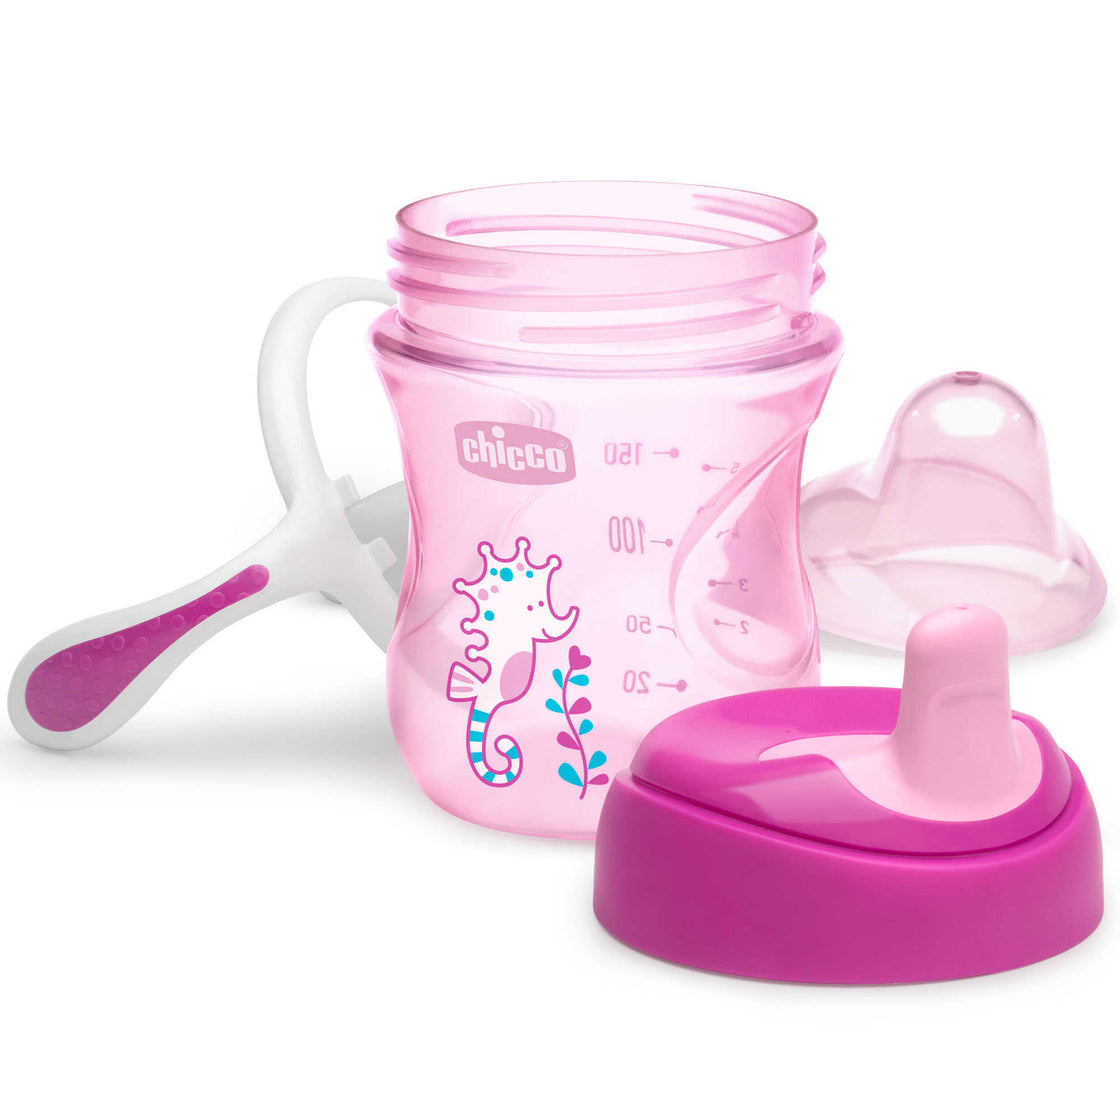 Chicco Training Cup 6M+, Pink – 200ml